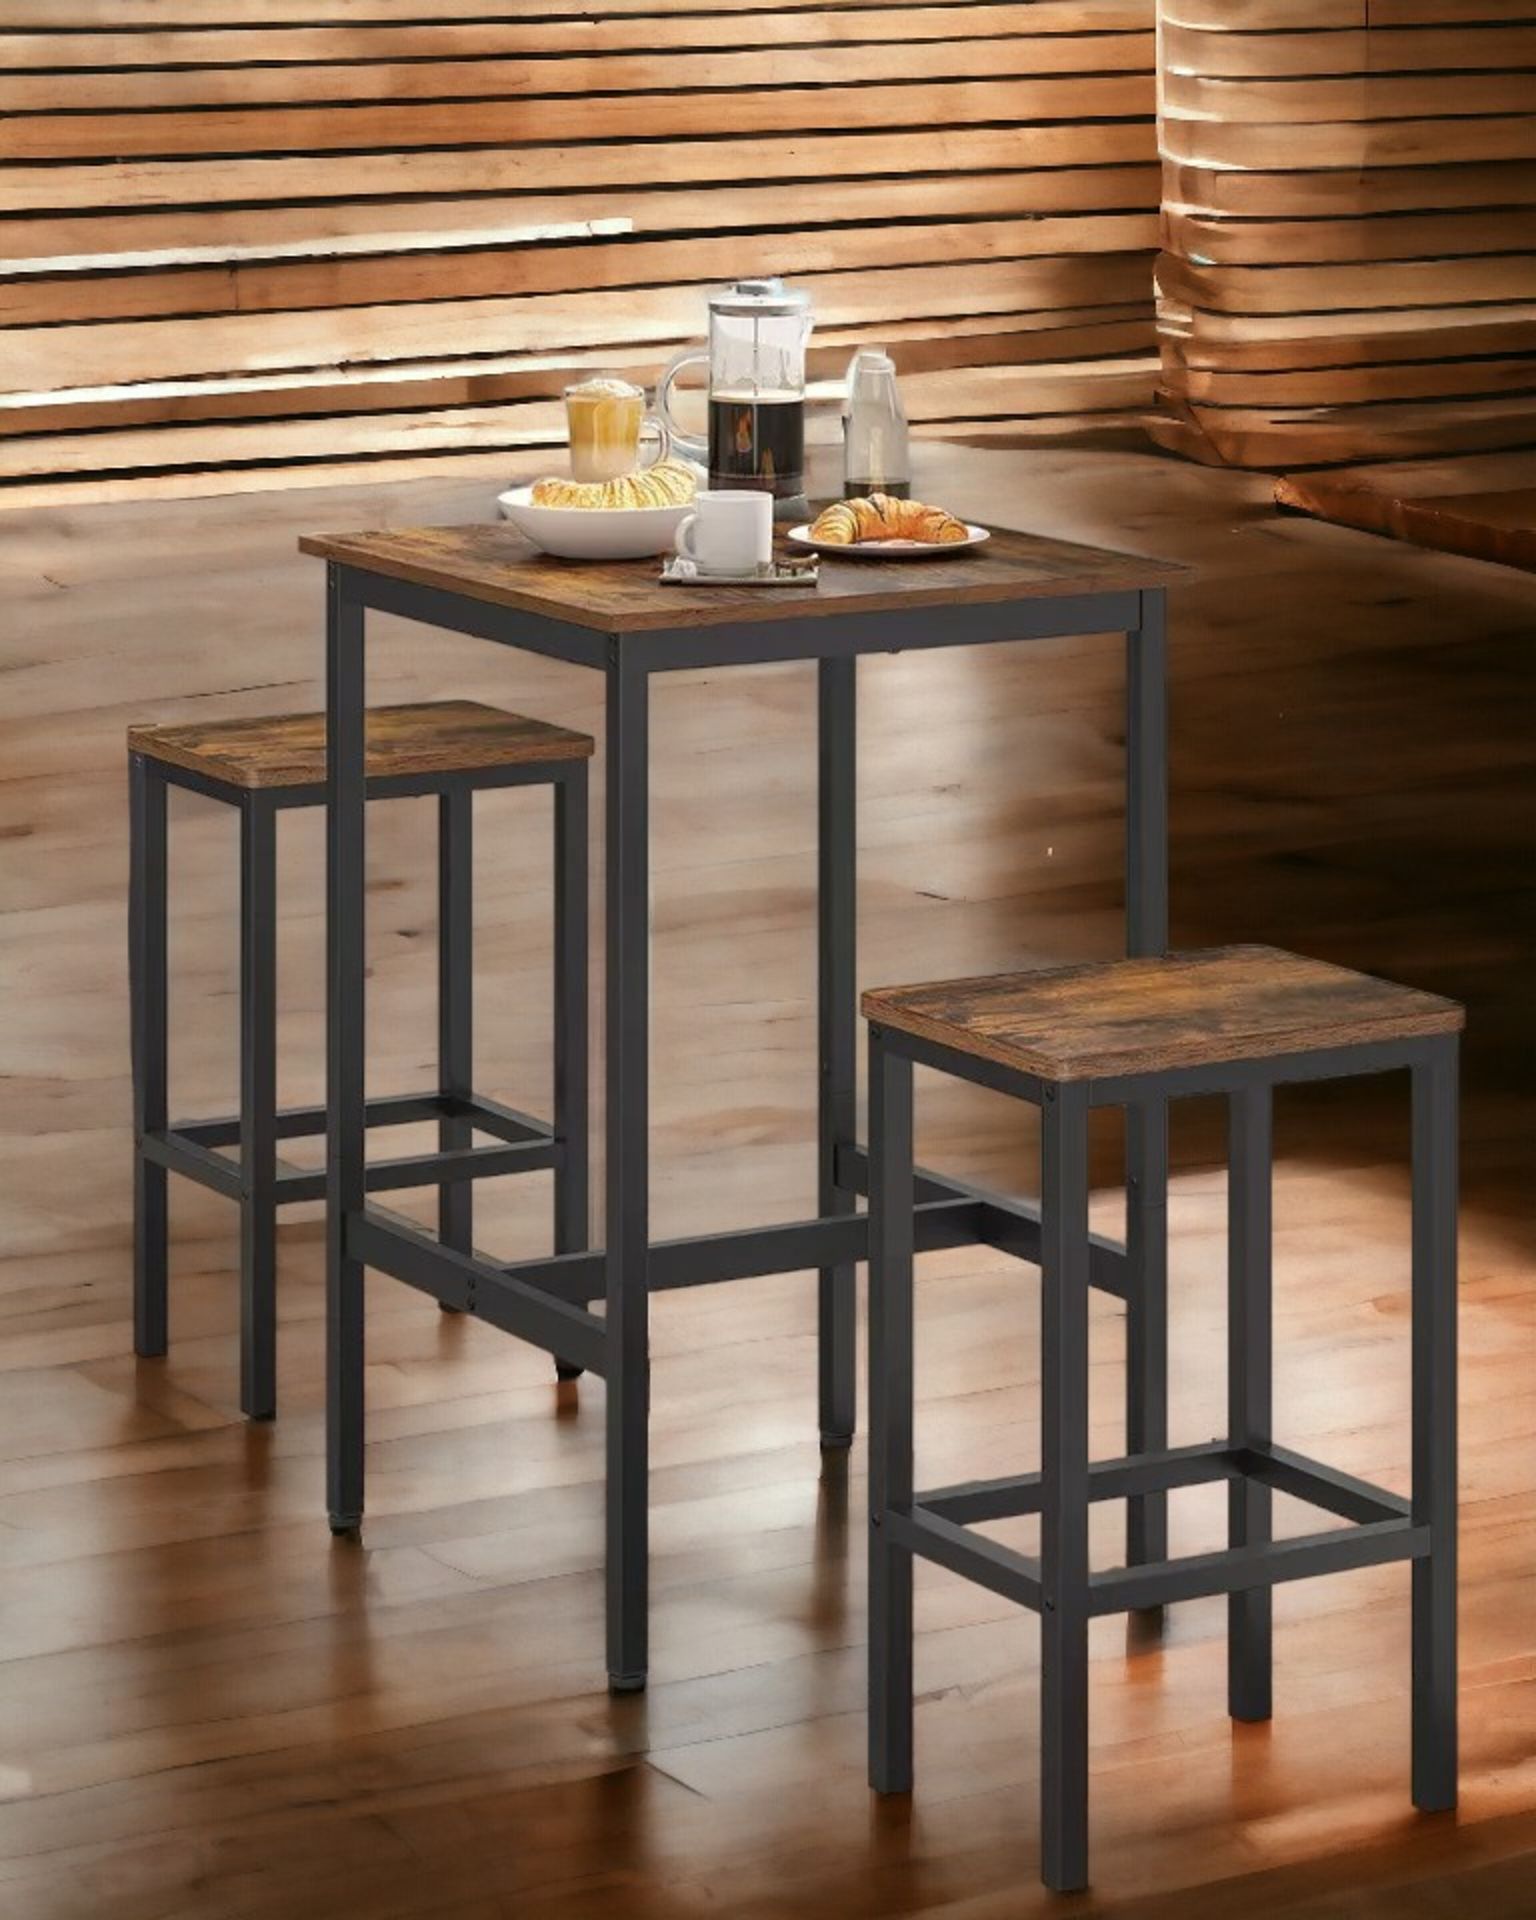 FREE DELIVERY - BRAND NEW DINING TABLE CHAIRS SET BAR TABLE STOOLS SET RUSTIC